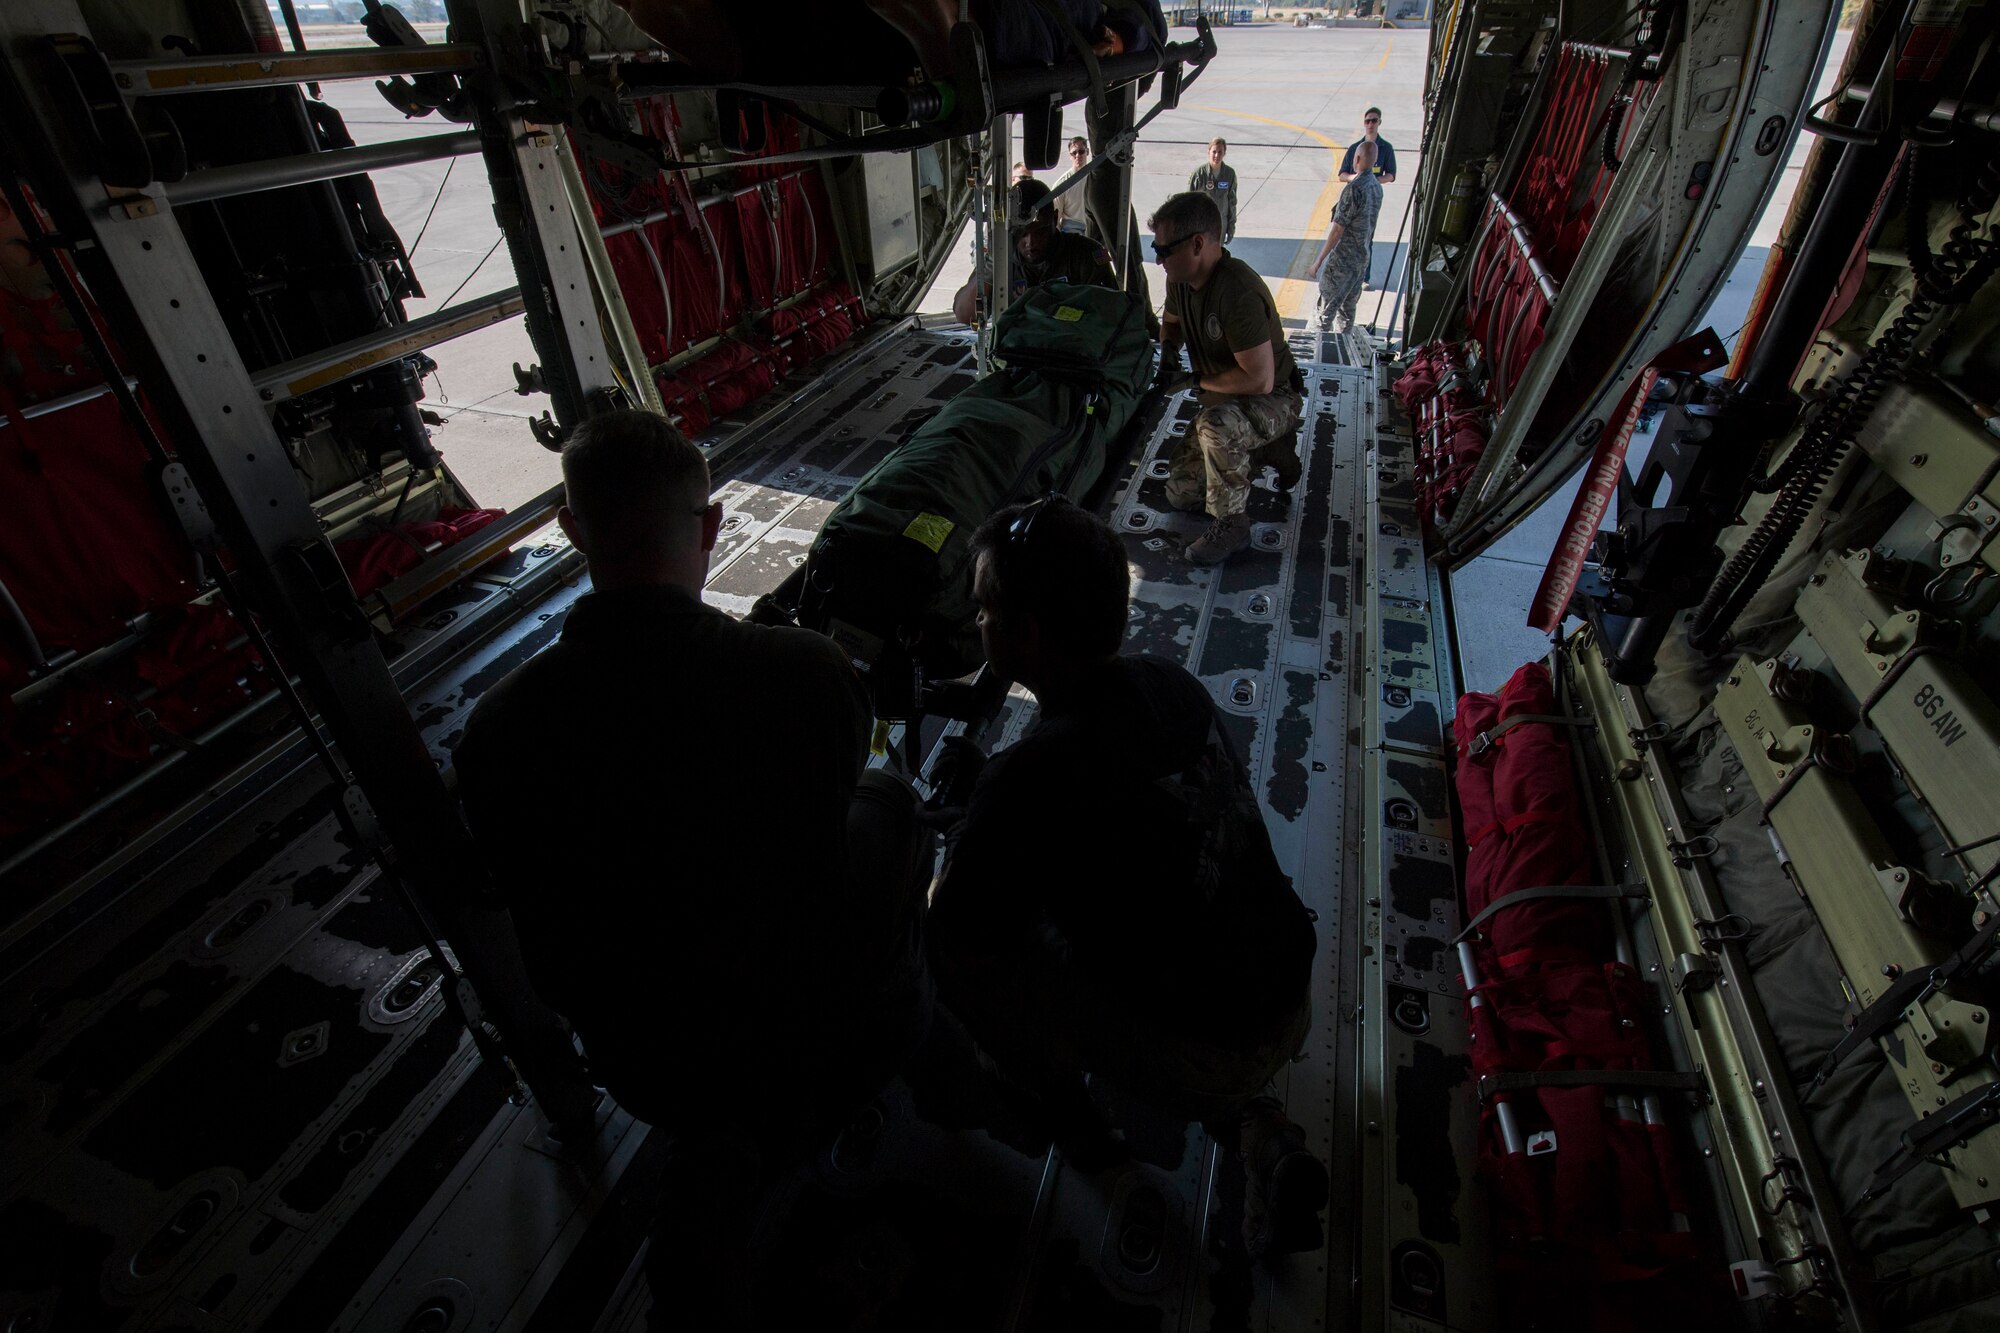 Members of the 86th Aeromedical Evacuation Squadron worked hand in hand with Hellenic service members to improve on joint aeromedical evacuation operations during exercise Stolen Cerberus V.